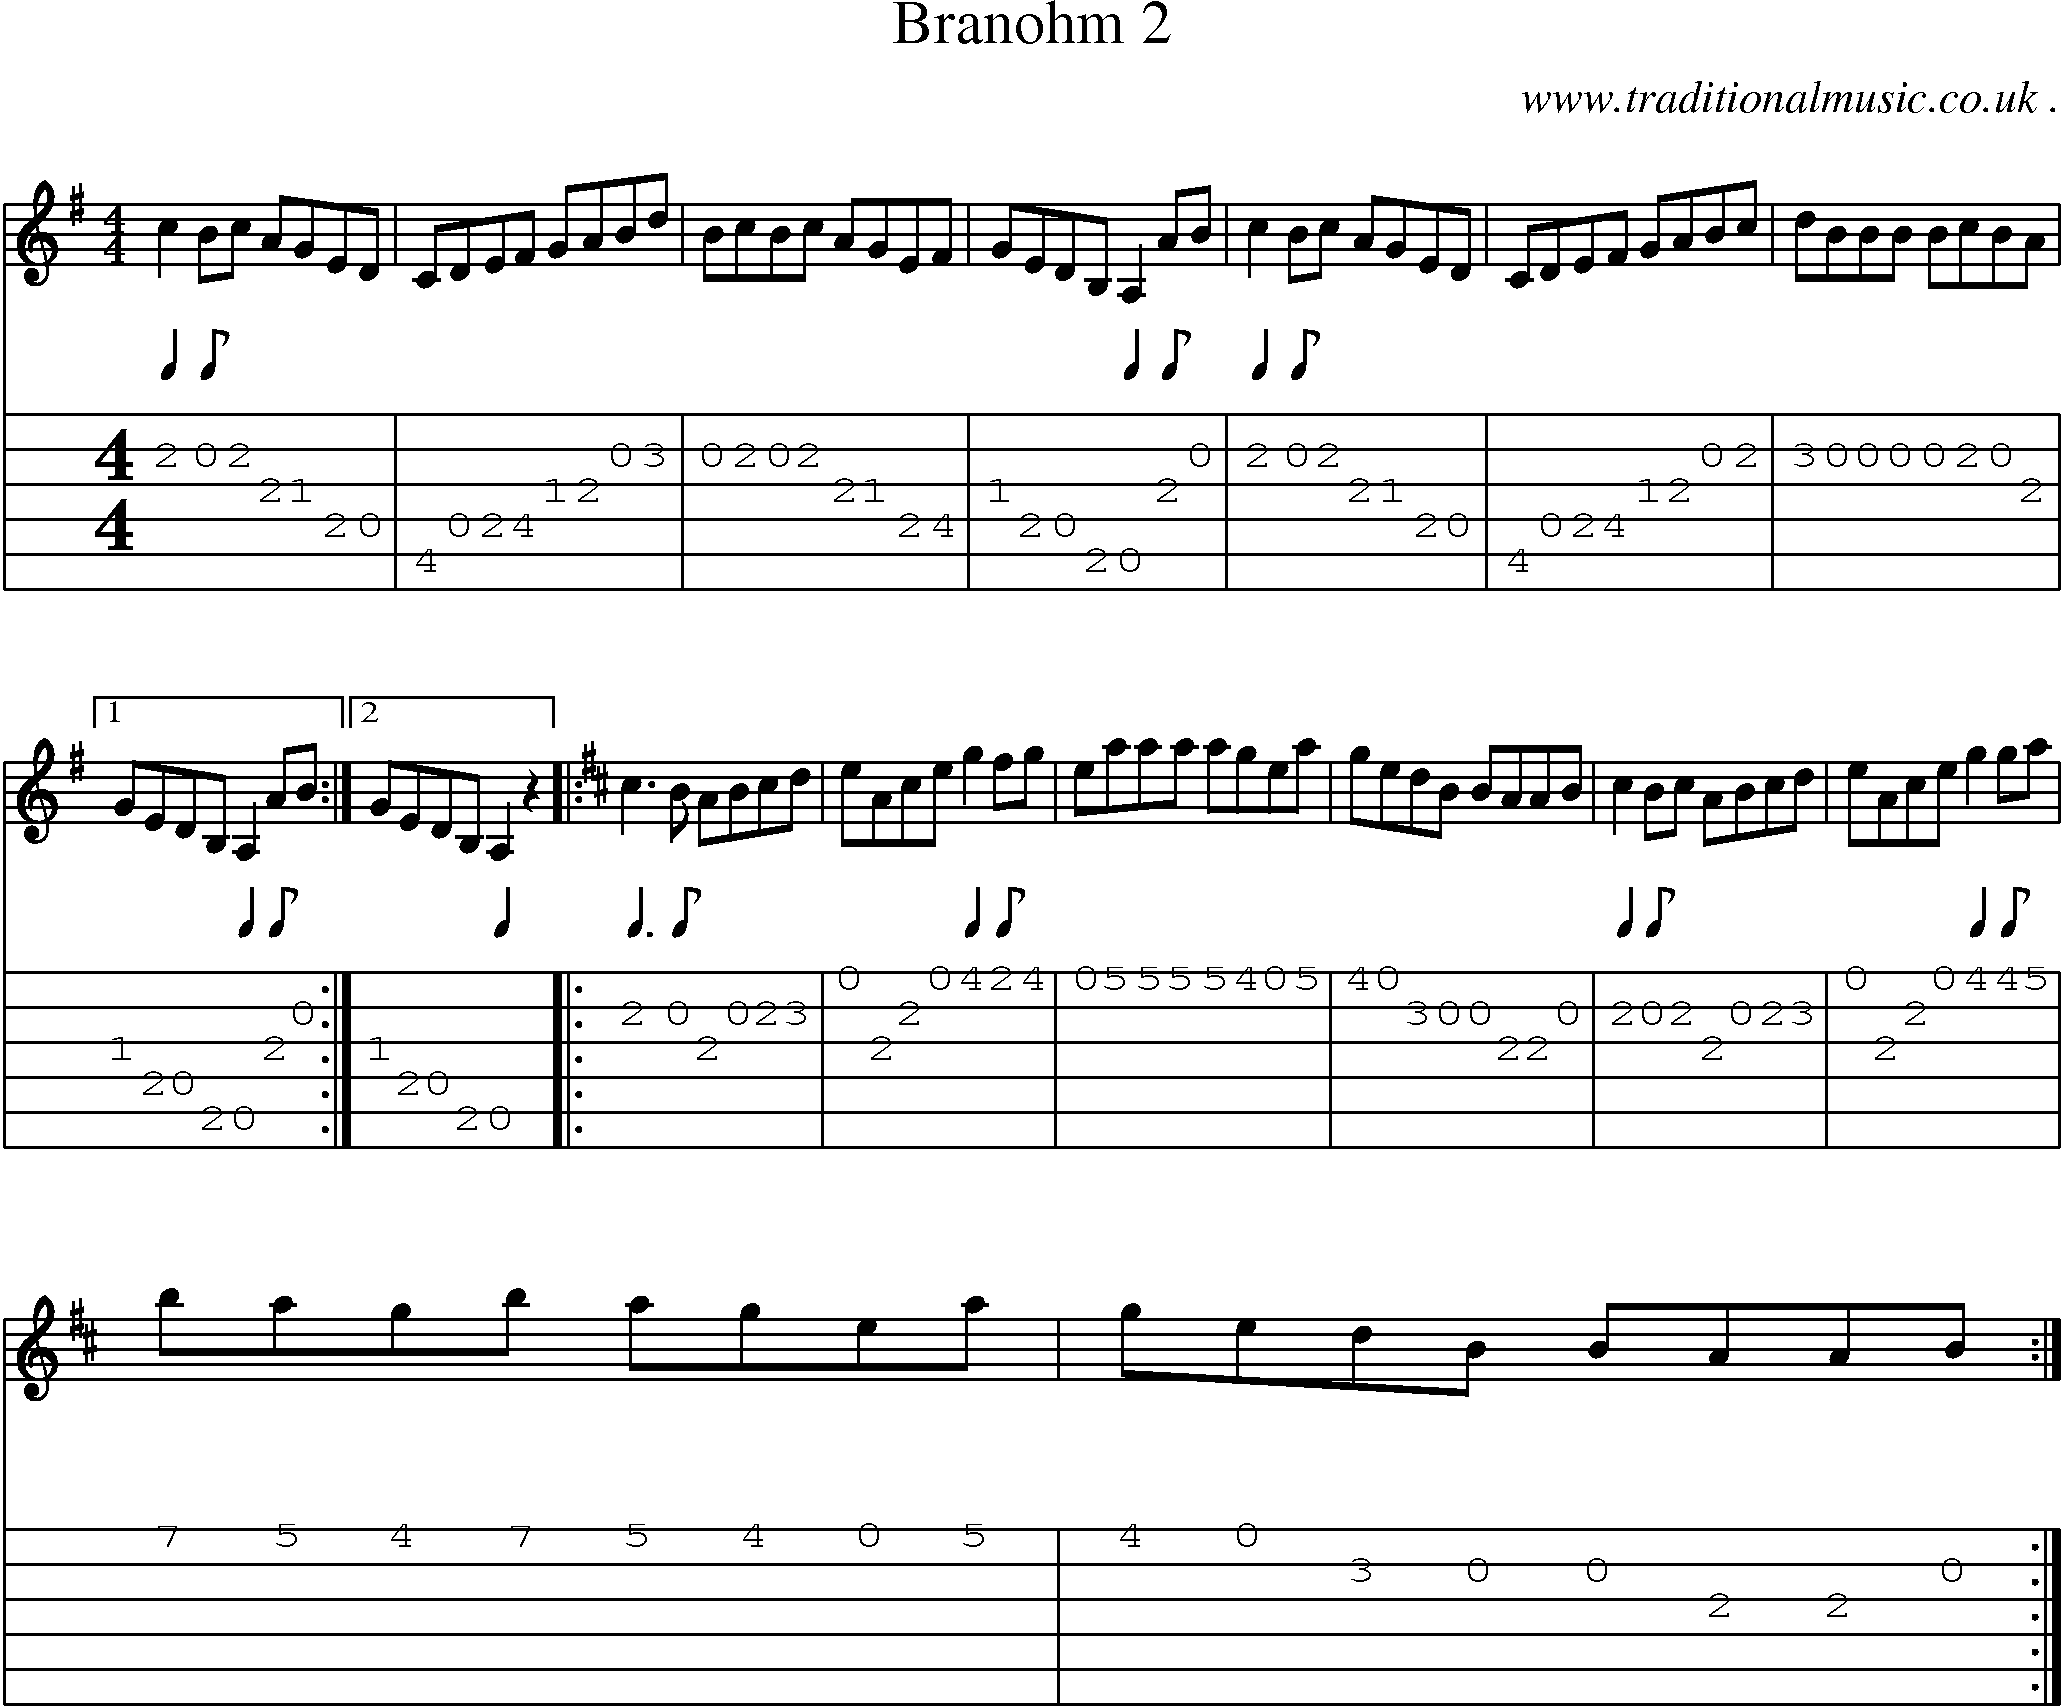 Sheet-Music and Guitar Tabs for Branohm 2